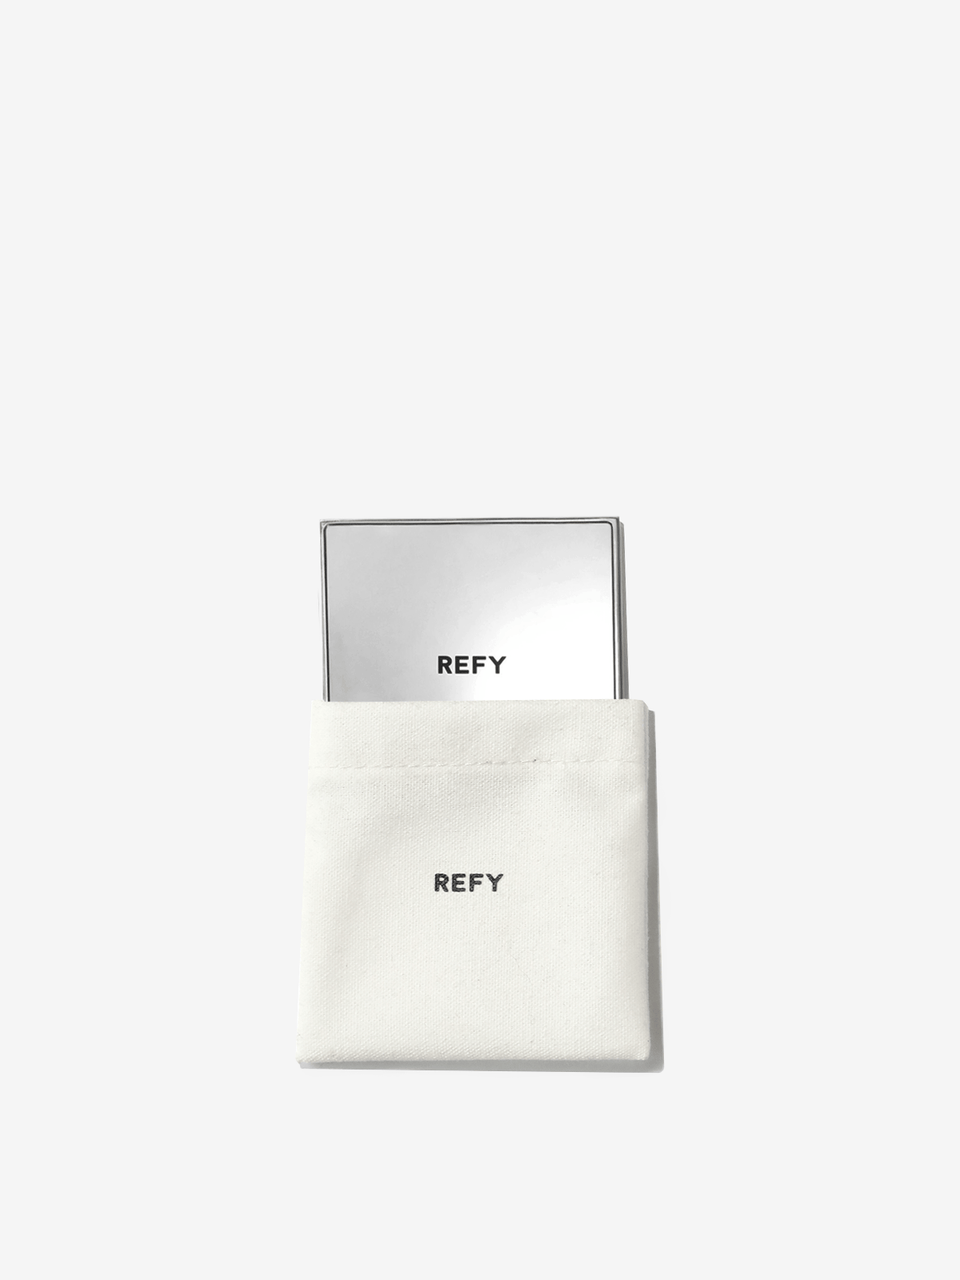 FRONT IMAGE OF REFY COMPACT MIRROR AND DUST BAG